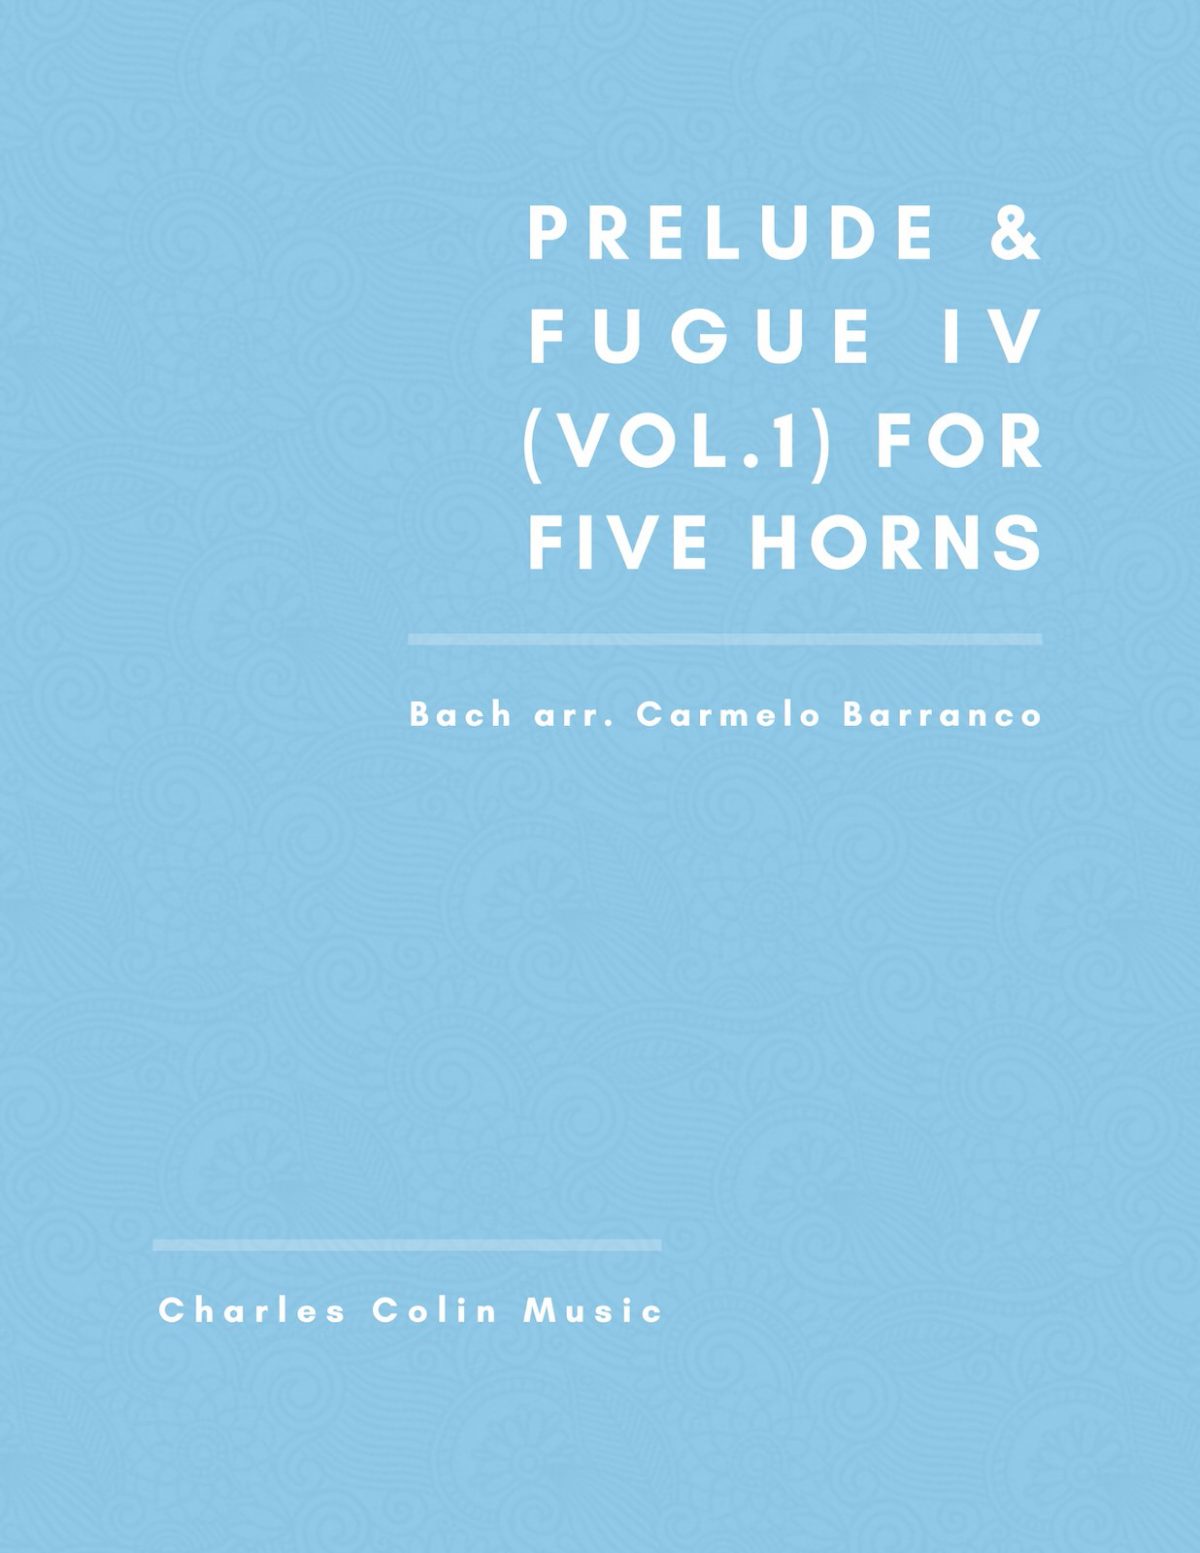 Prelude & Fugue IV Vol.1 for 5 Horns (Score and Parts) by Bach, J.S ...